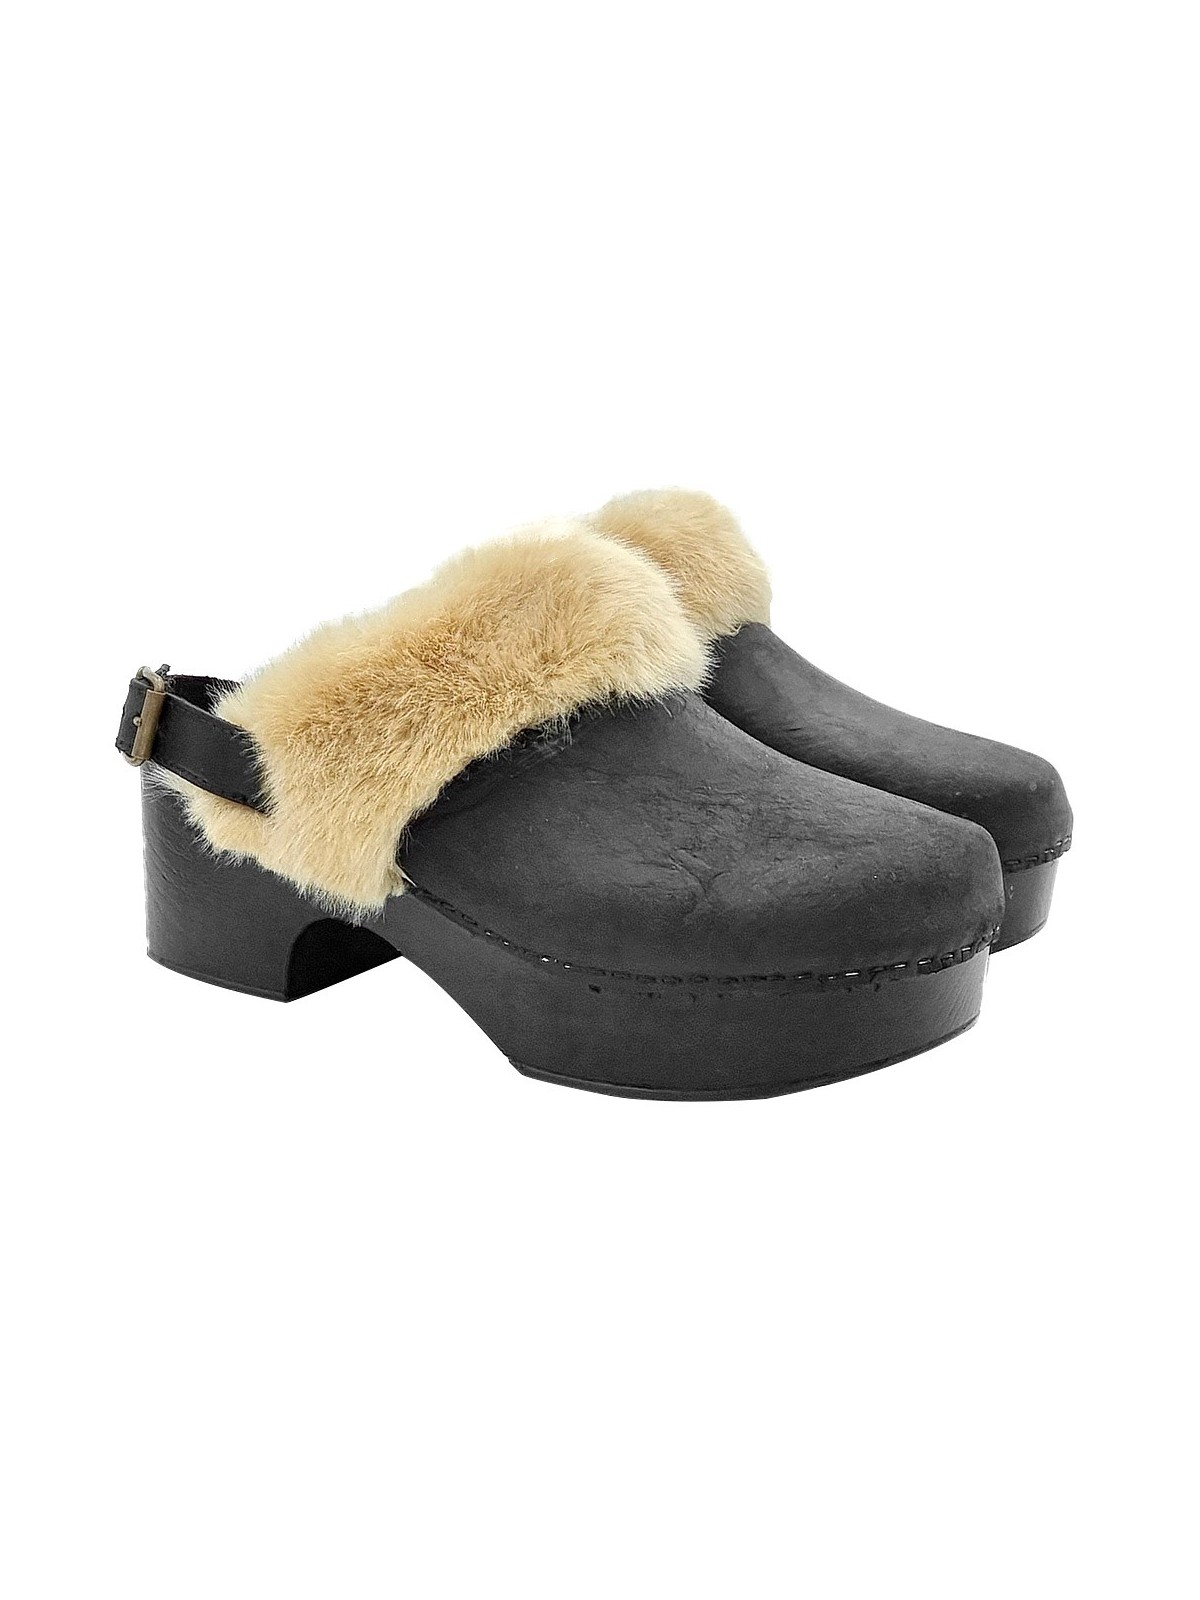 BLACK DUTCH SANDALS IN LEATHER WITH BEIGE FUR